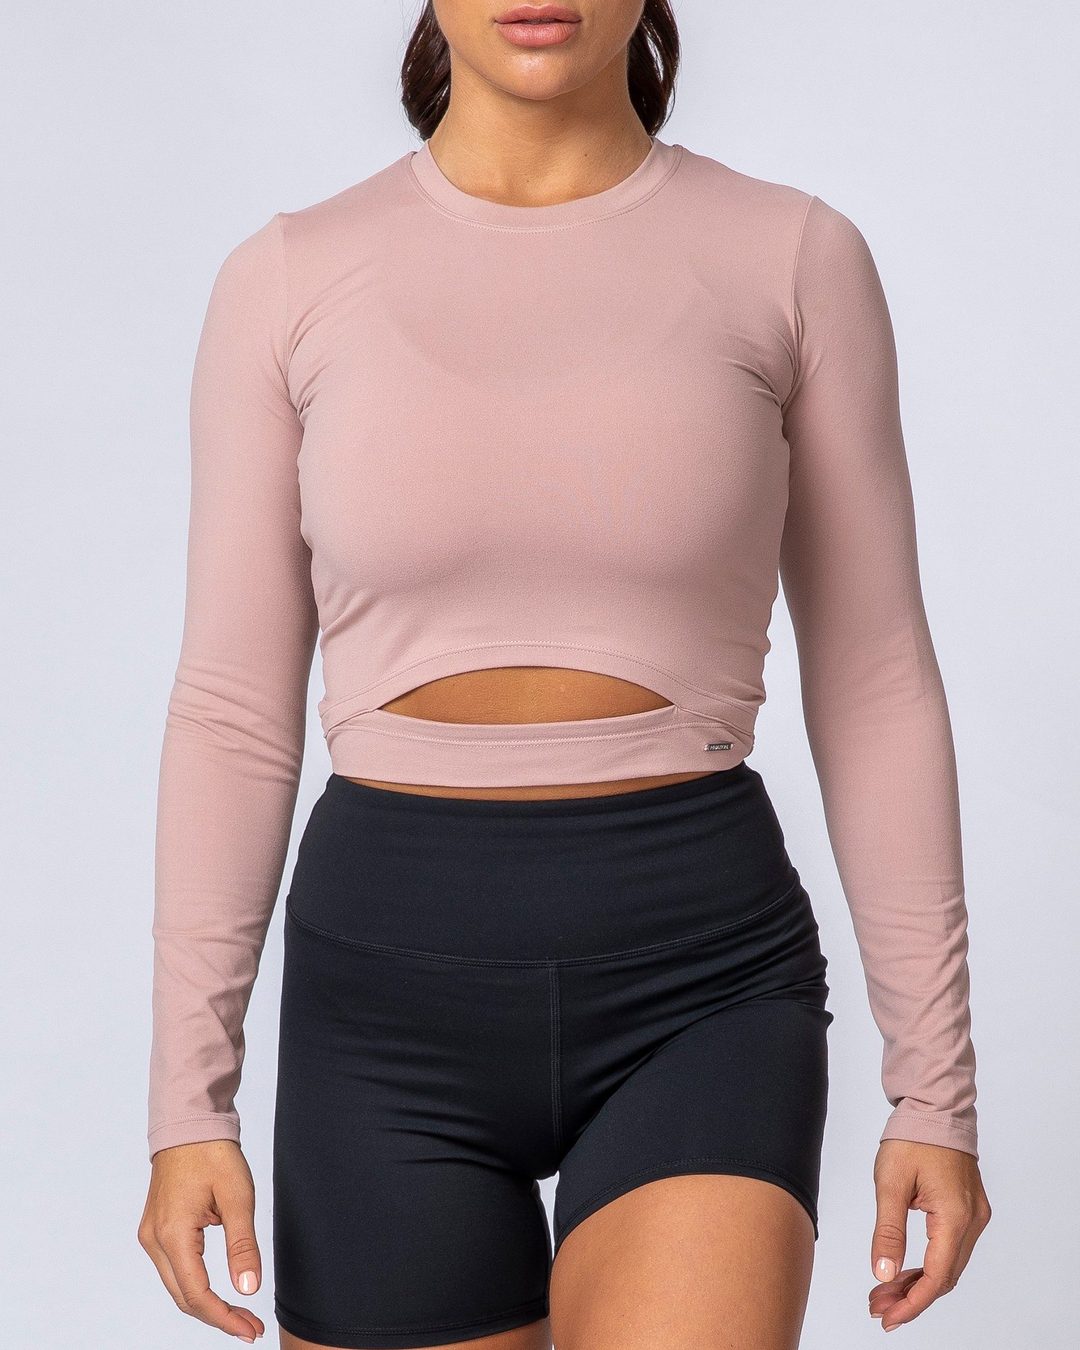 musclenation Half Time Long Sleeve - Fawn